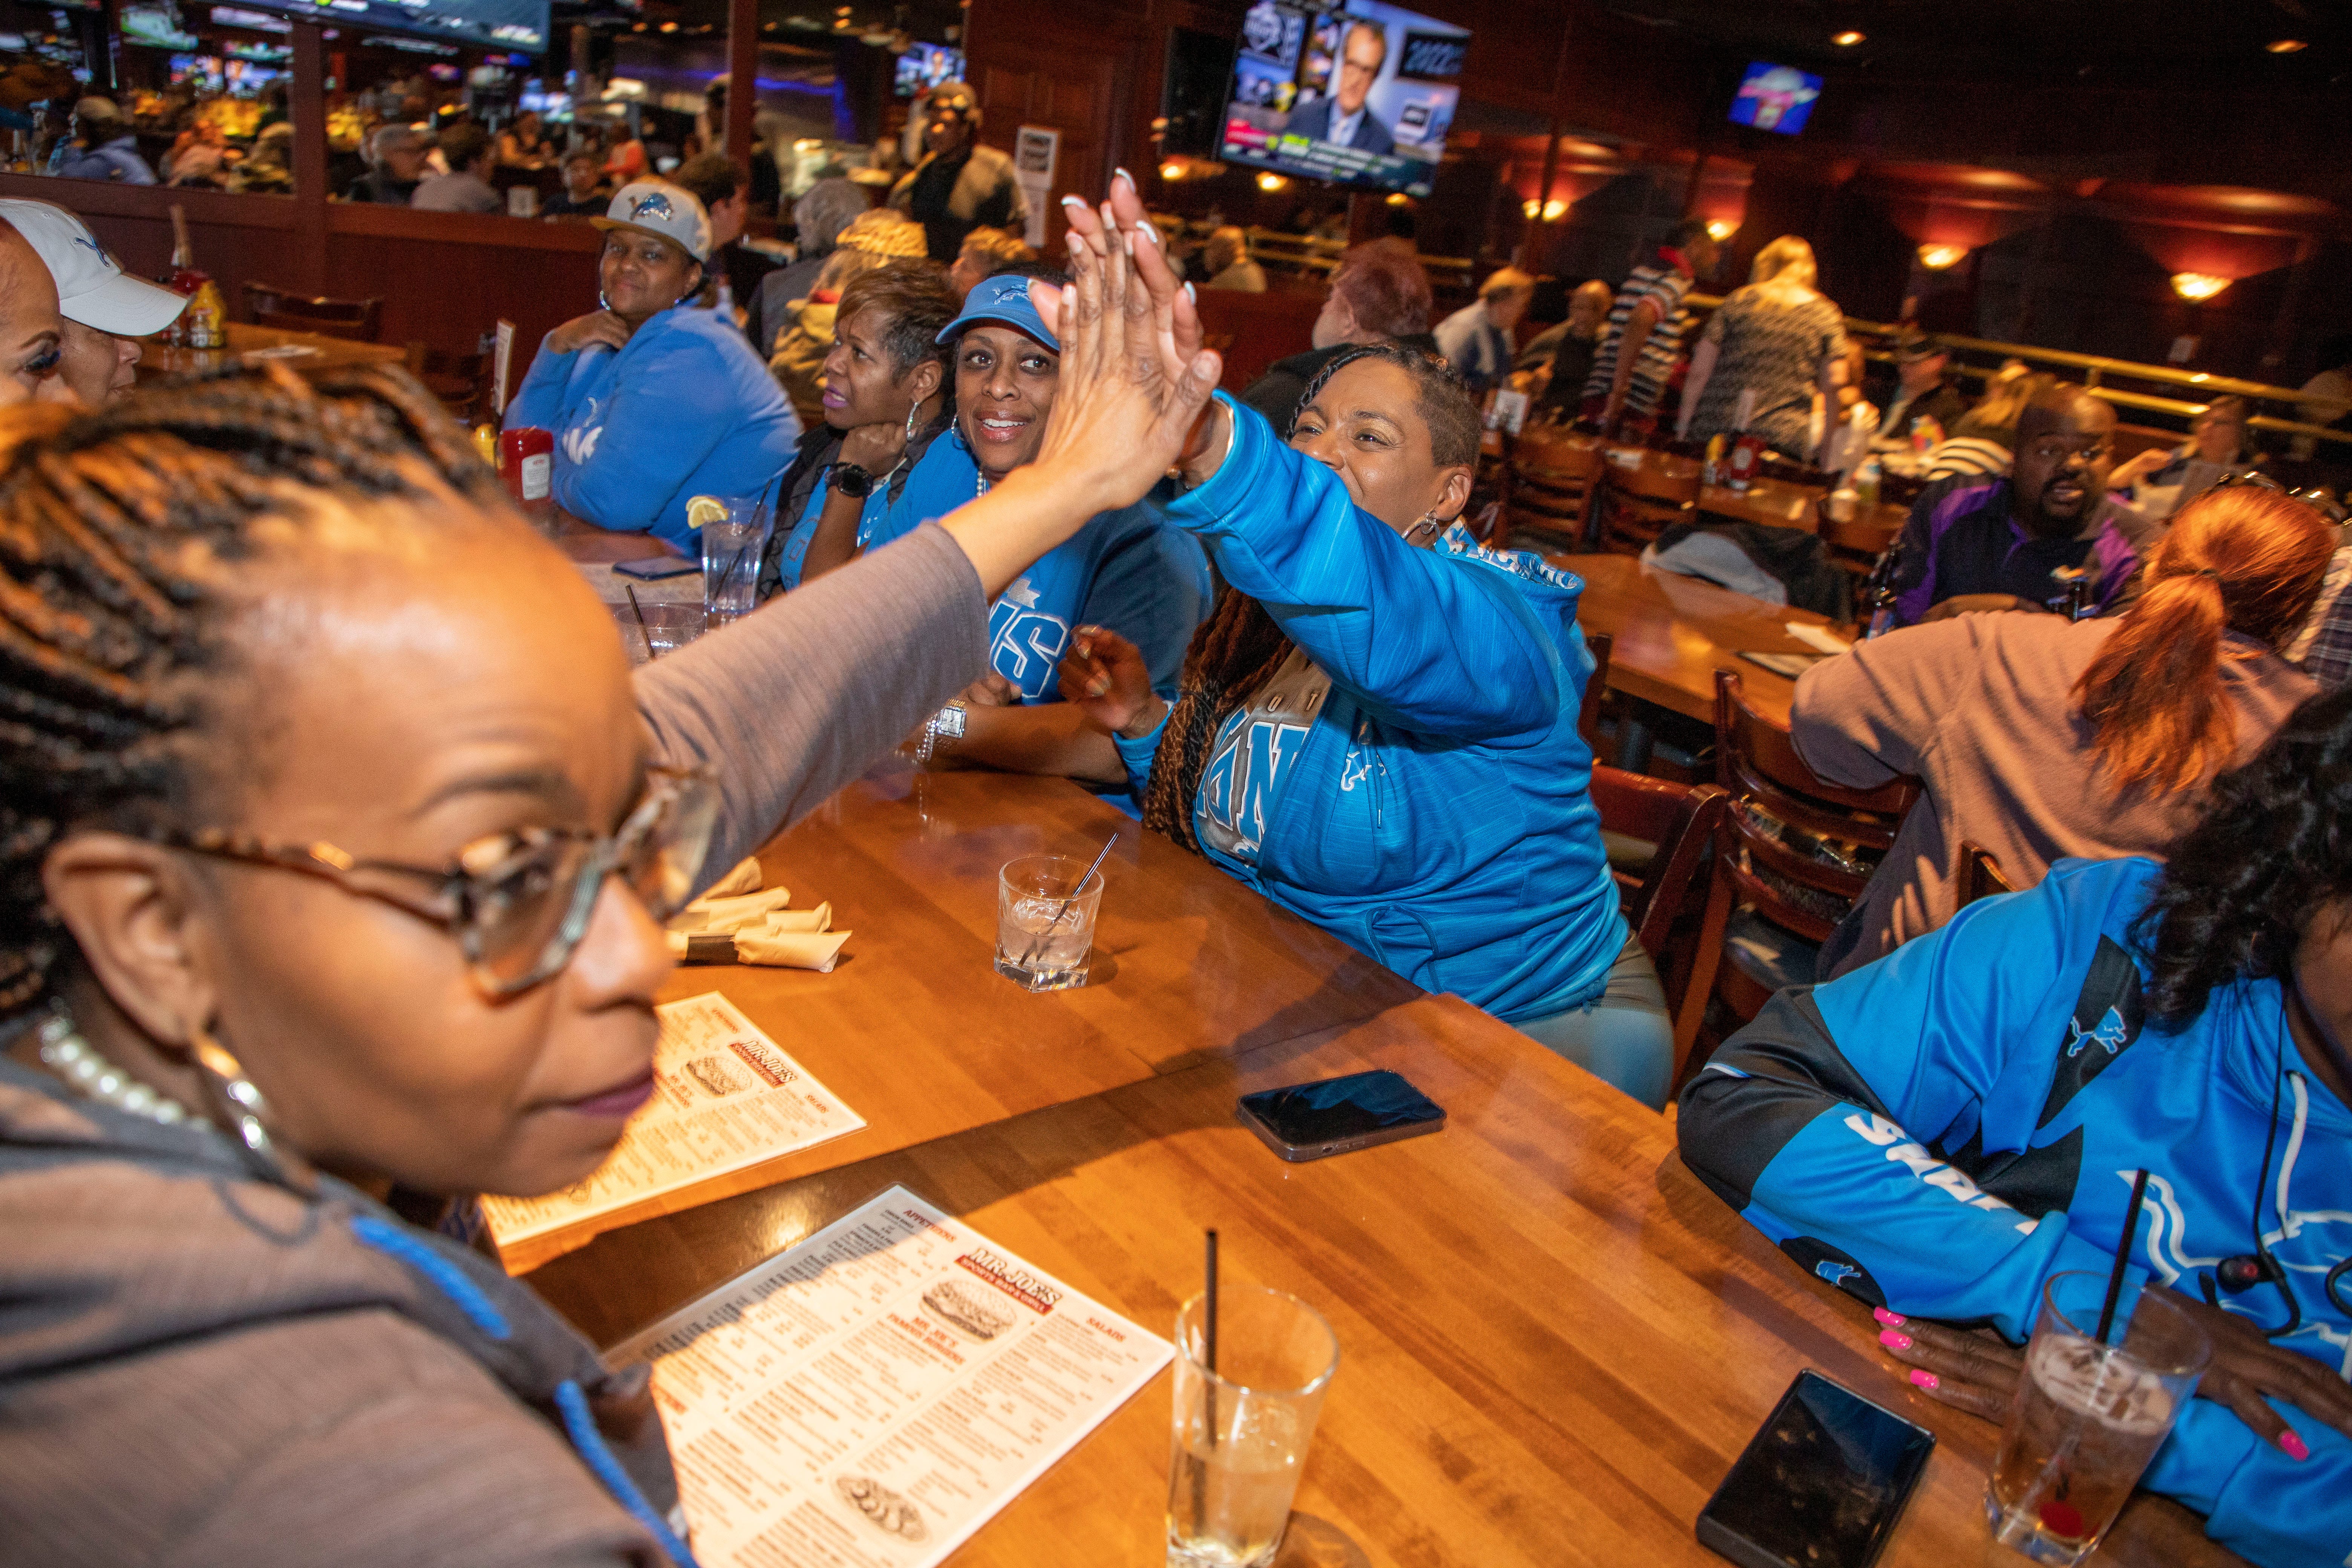 Day 2 of the NFL Draft on April 29, 2022, that brought 10 proud members of the Detroit Lions Tailgating Divas to Mr. Joe's Bar and Grill in Southfield. Before the Lions selected Kentucky defensive end Josh Paschal with the team's first pick of Day 2, the Divas celebrated their longtime friendships and even accepted a friendly challenge from another fan to sing the Lions fight song.